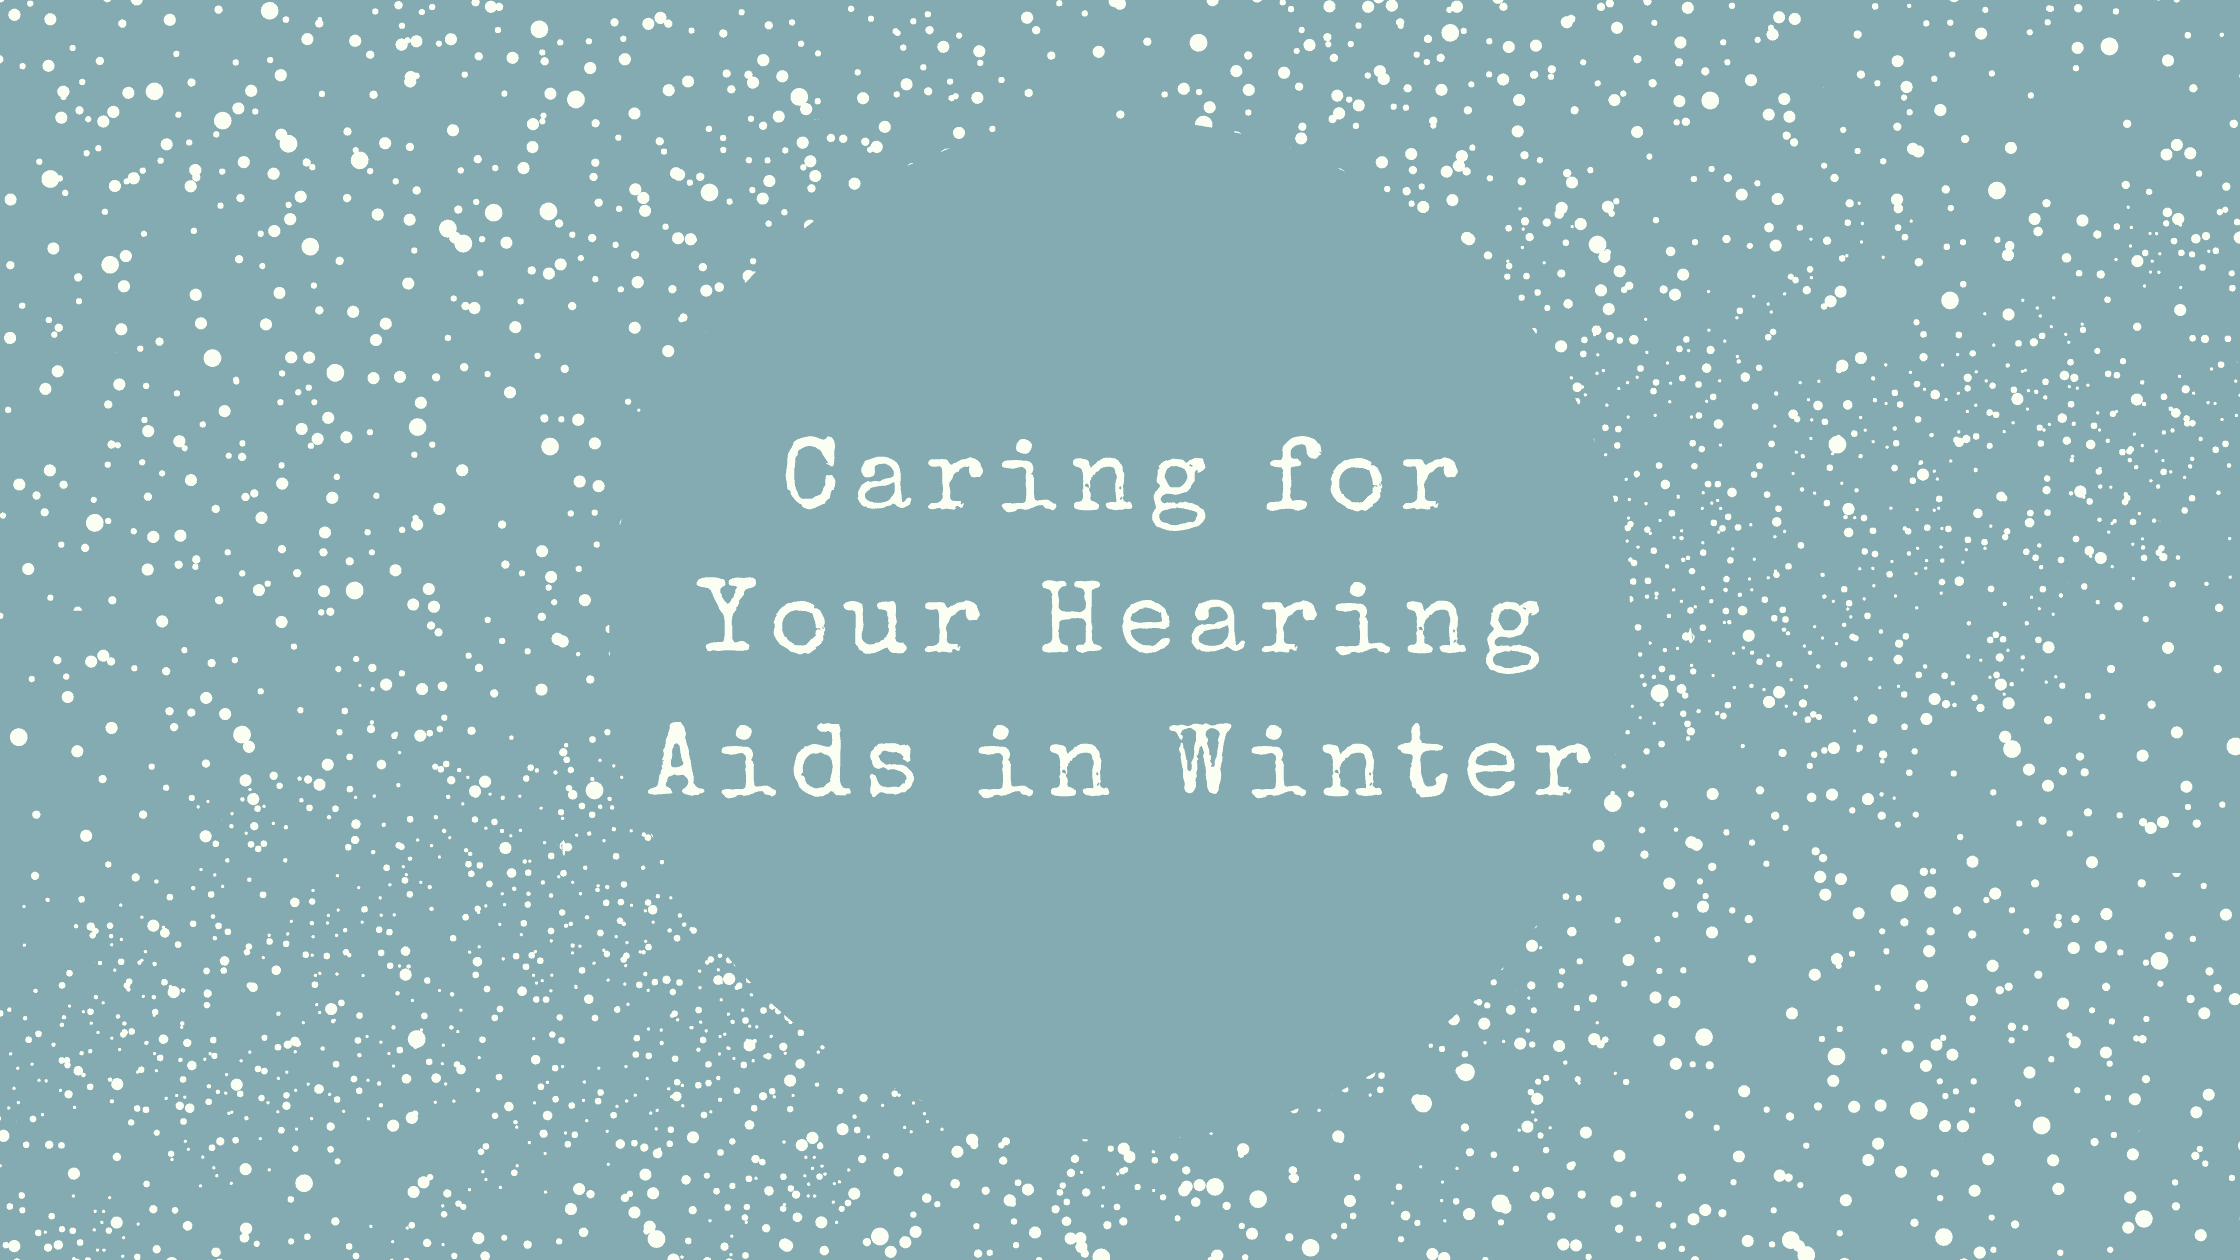 Caring for Your Hearing Aids in Winter